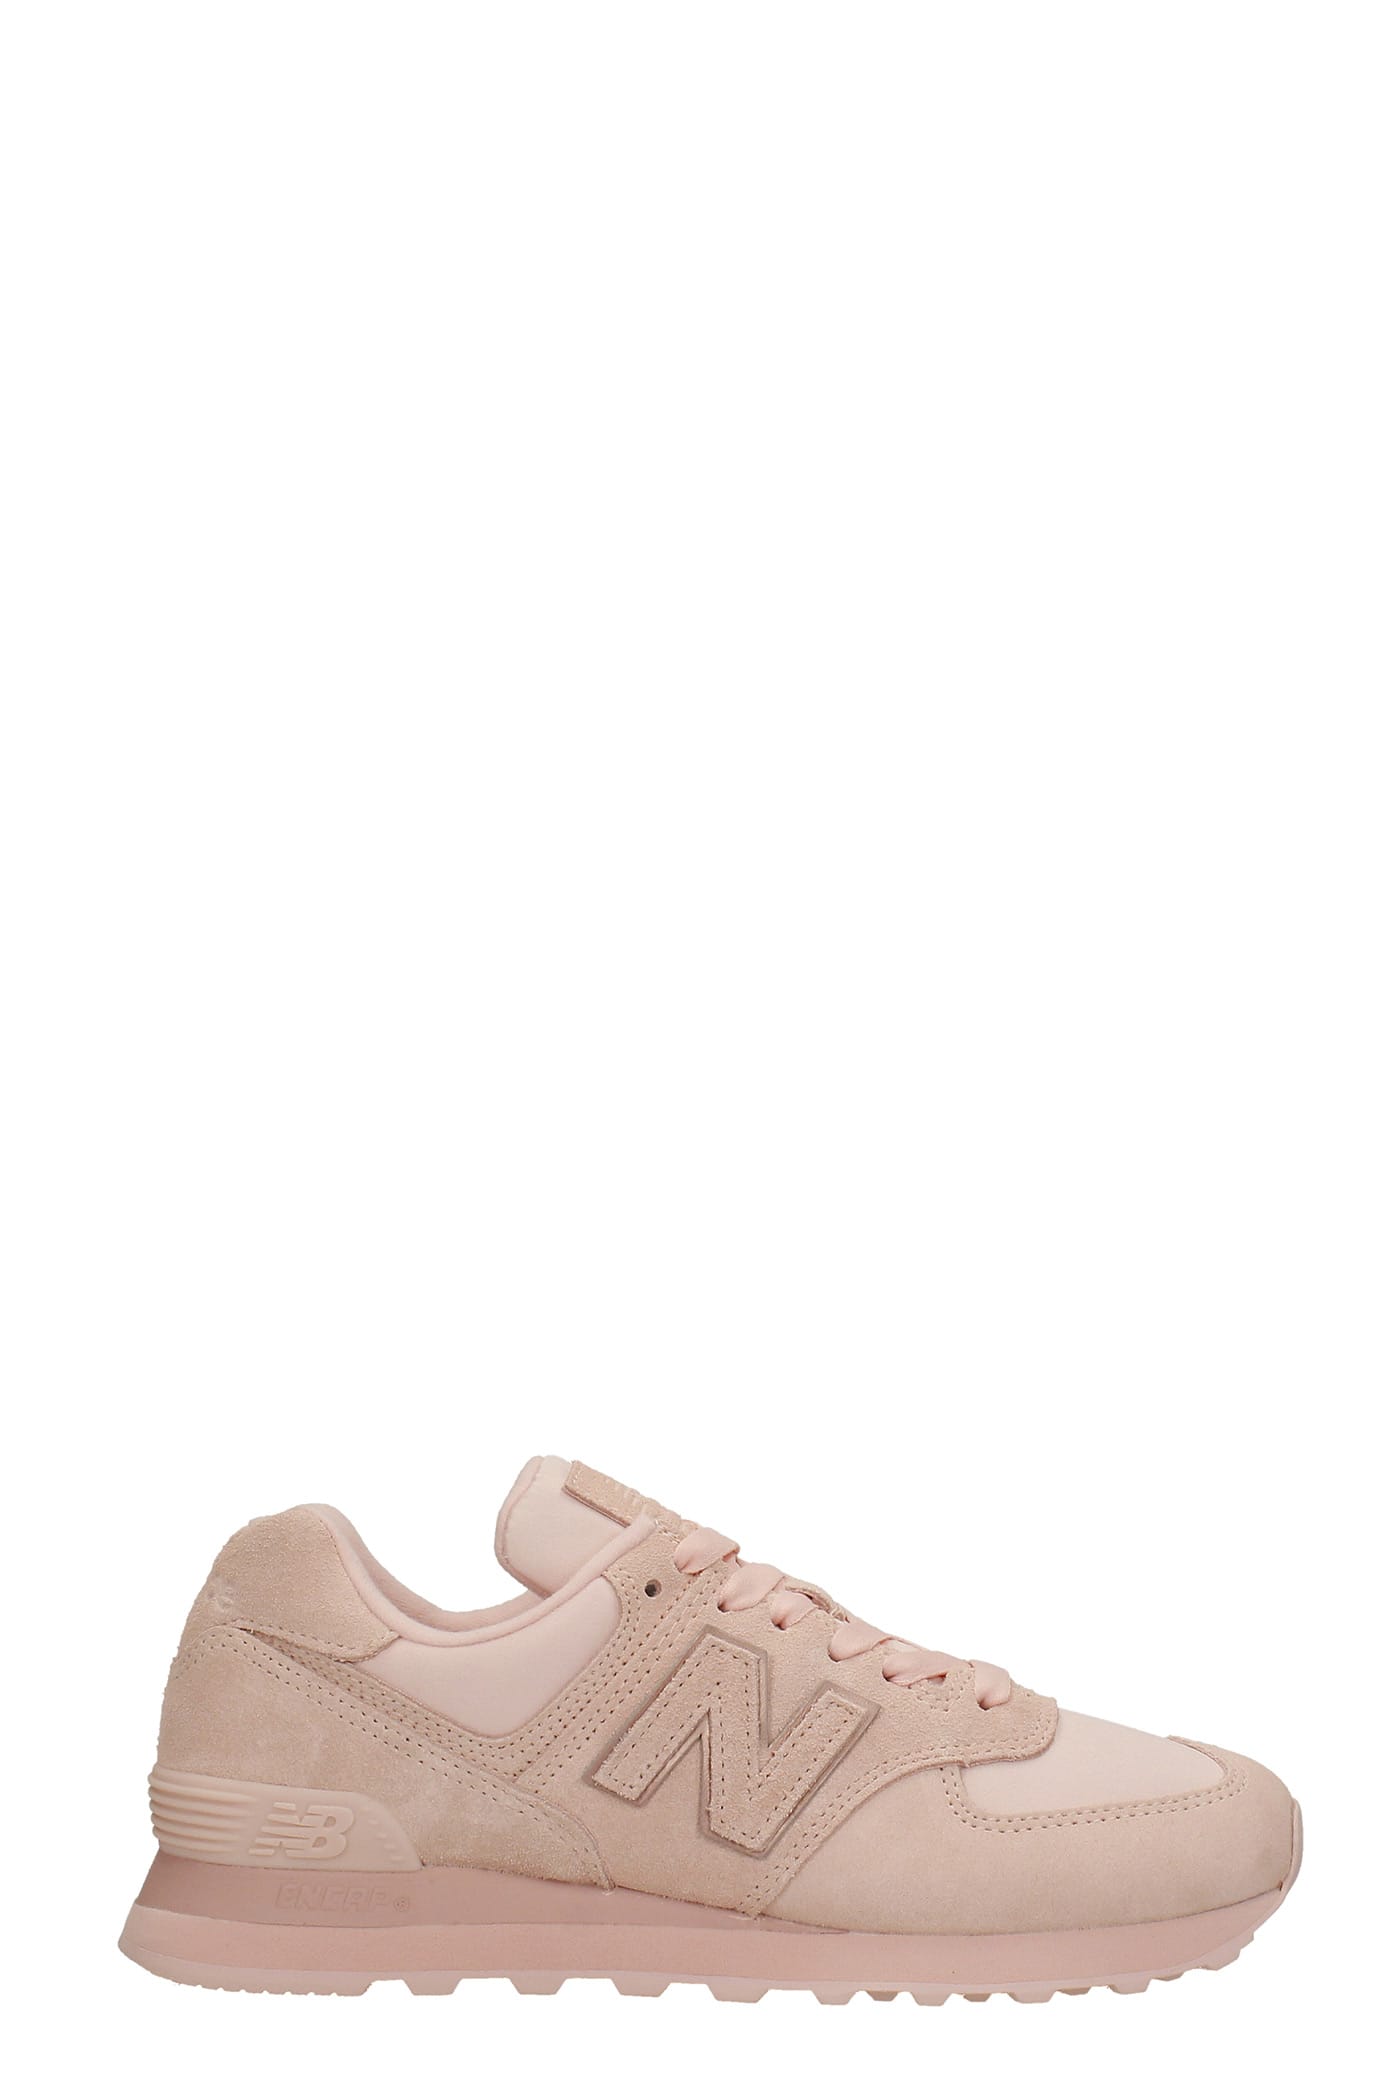 New Balance 574 Sneakers In Rose-pink Suede And Fabric